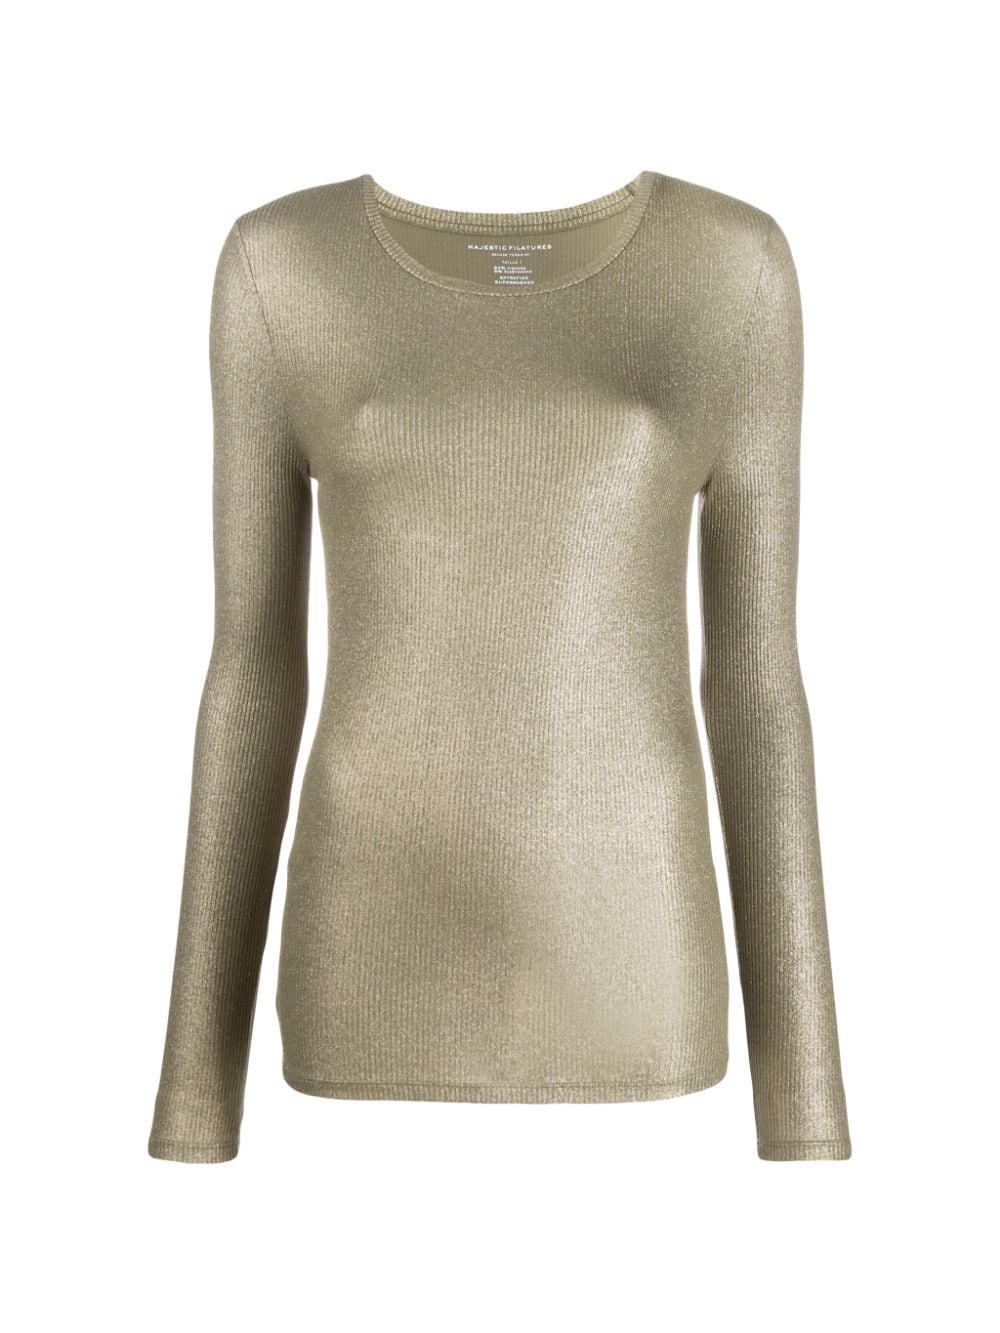 Majestic Filatures Shimmer Ribbed Knit Jumper in Gold (Metallic) - Lyst